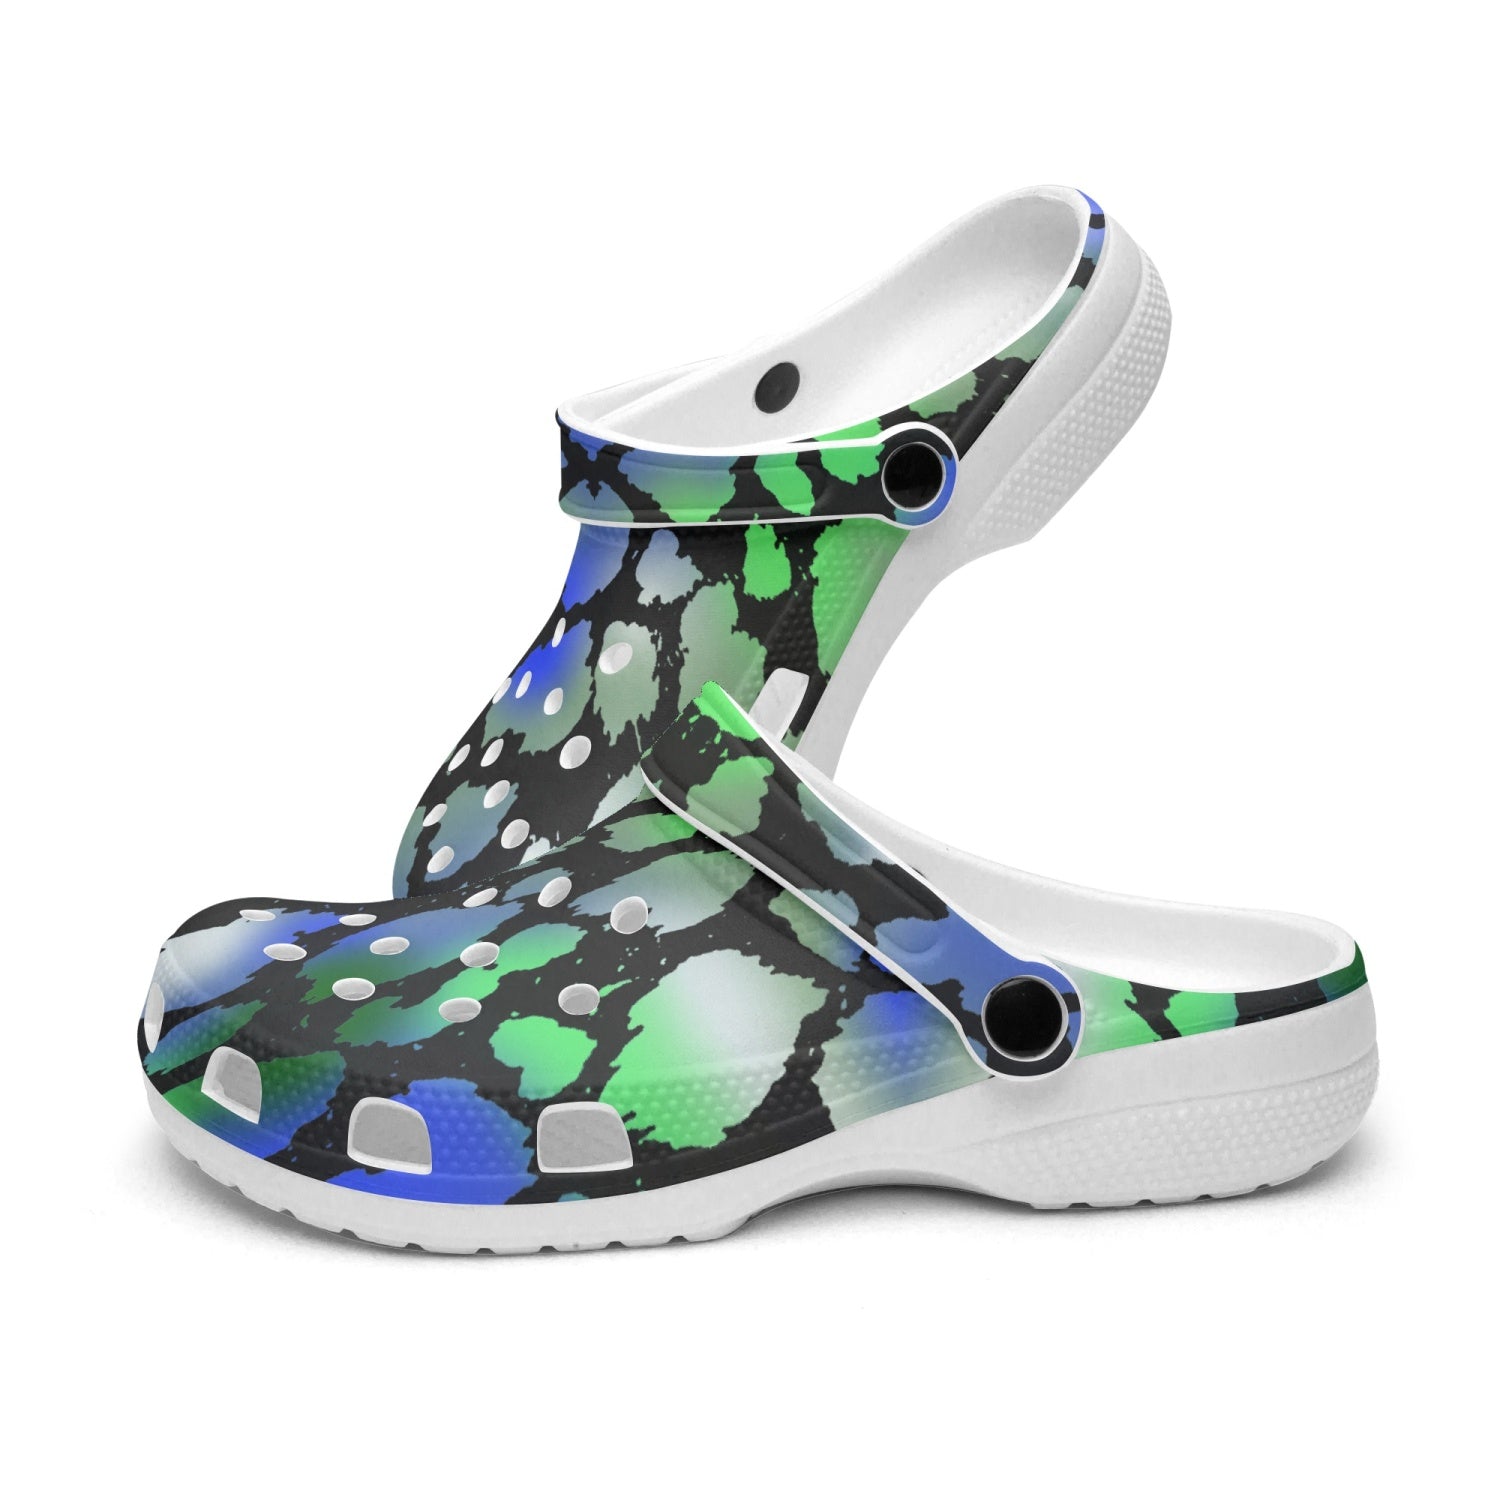 Blue And Green Camo Leopard Unisex White Rubber Clogs